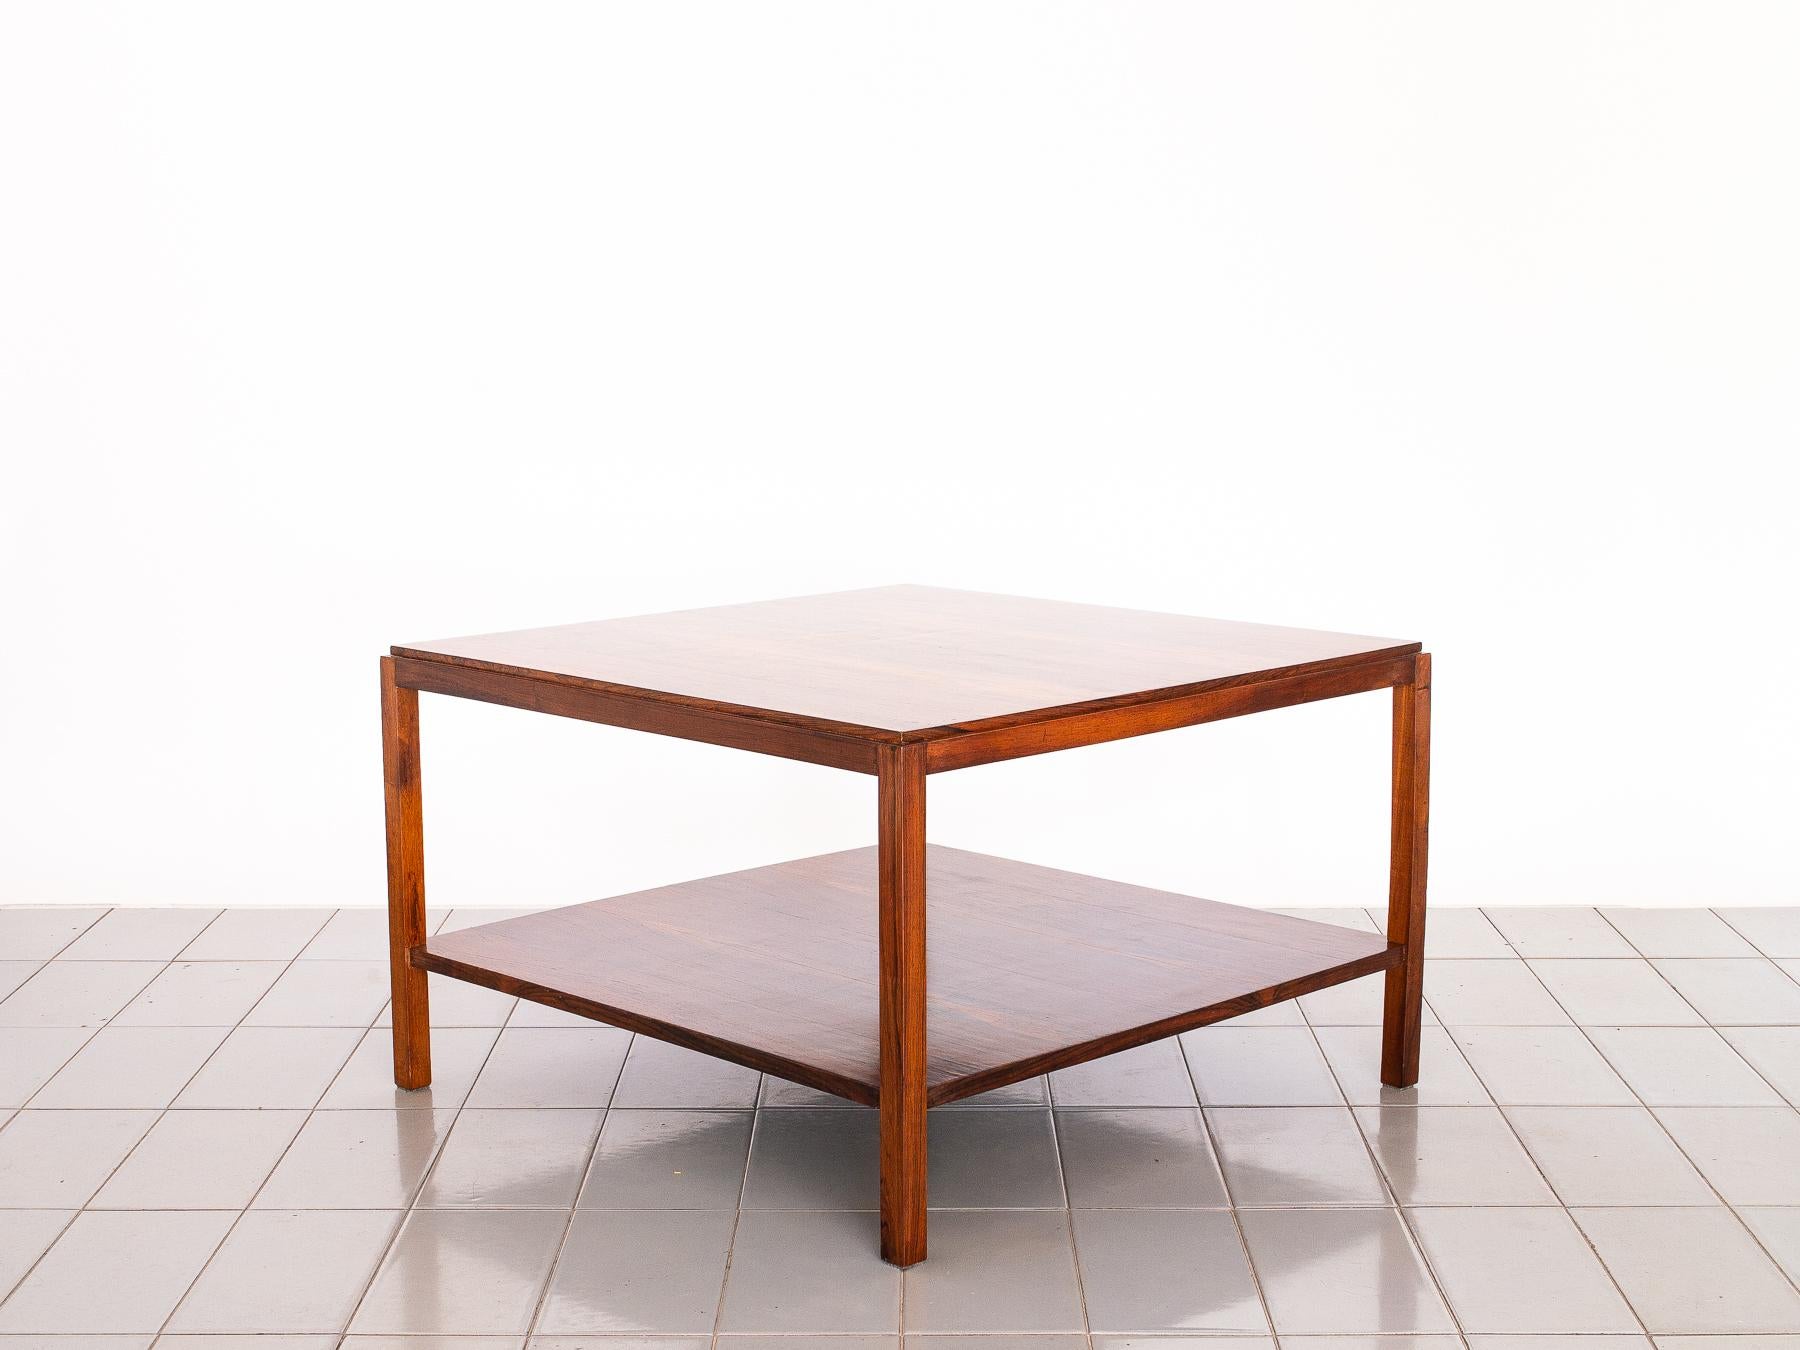 Mid-Century Modern 1950s Square Side Table in Rosewood by Sergio Rodrigues, Brazilian Modernism